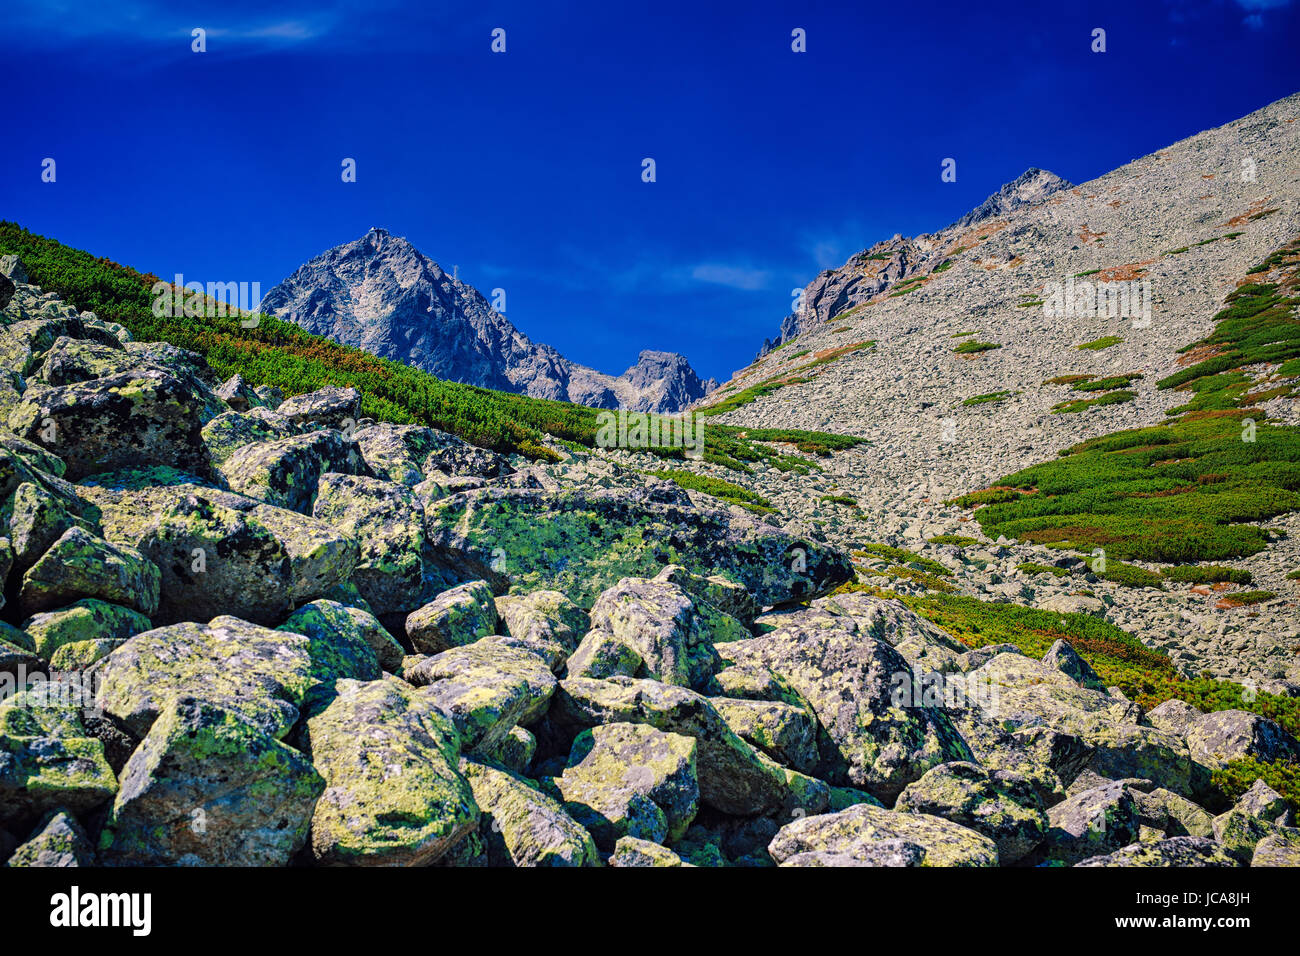 High Tatra Mountains landscape with stones Stock Photo